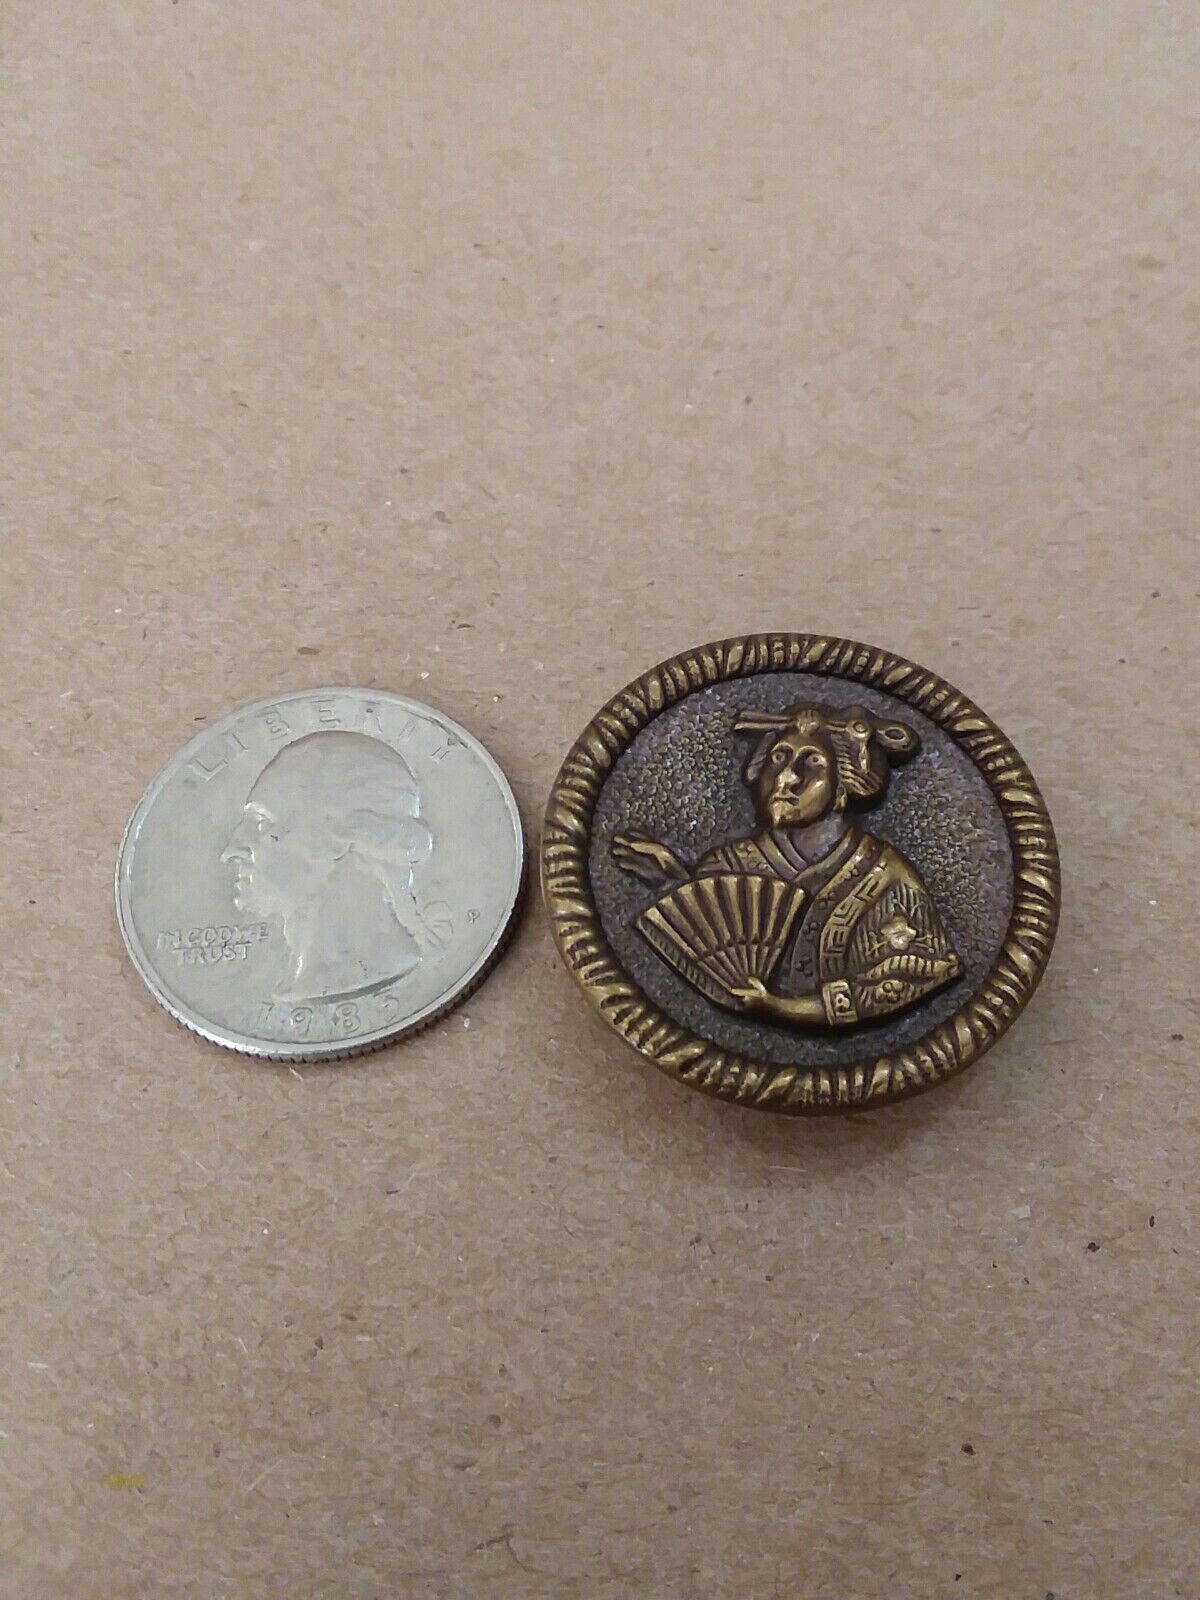 ANTIQUE VICTORIAN BUTTON ( EUROPEAN WOMAN WITH HER FAN).